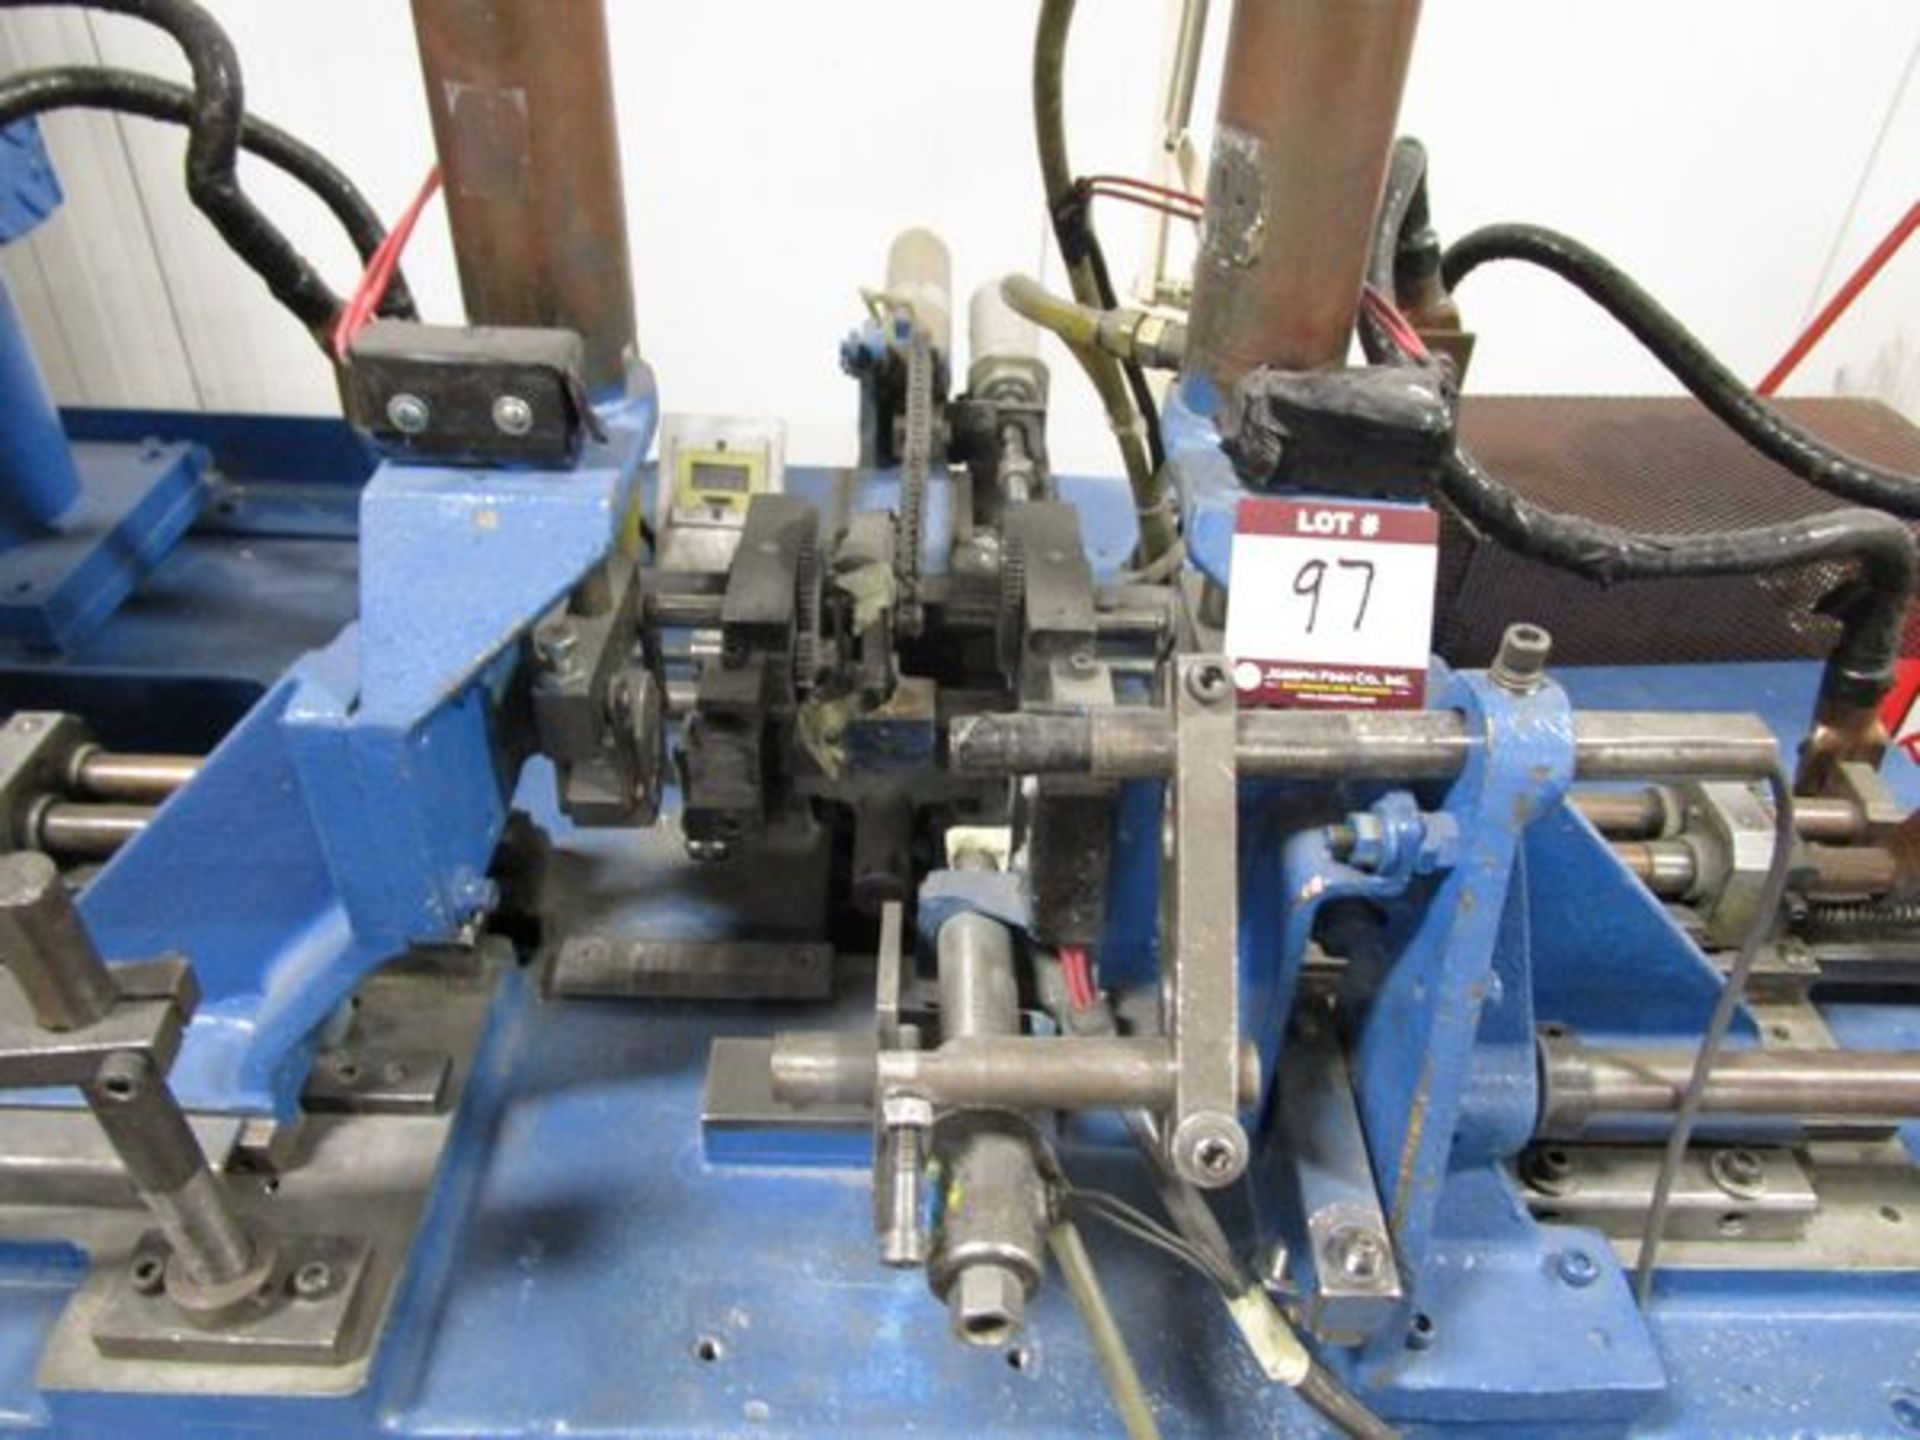 Axial Lead Attachment Machine - Image 2 of 3